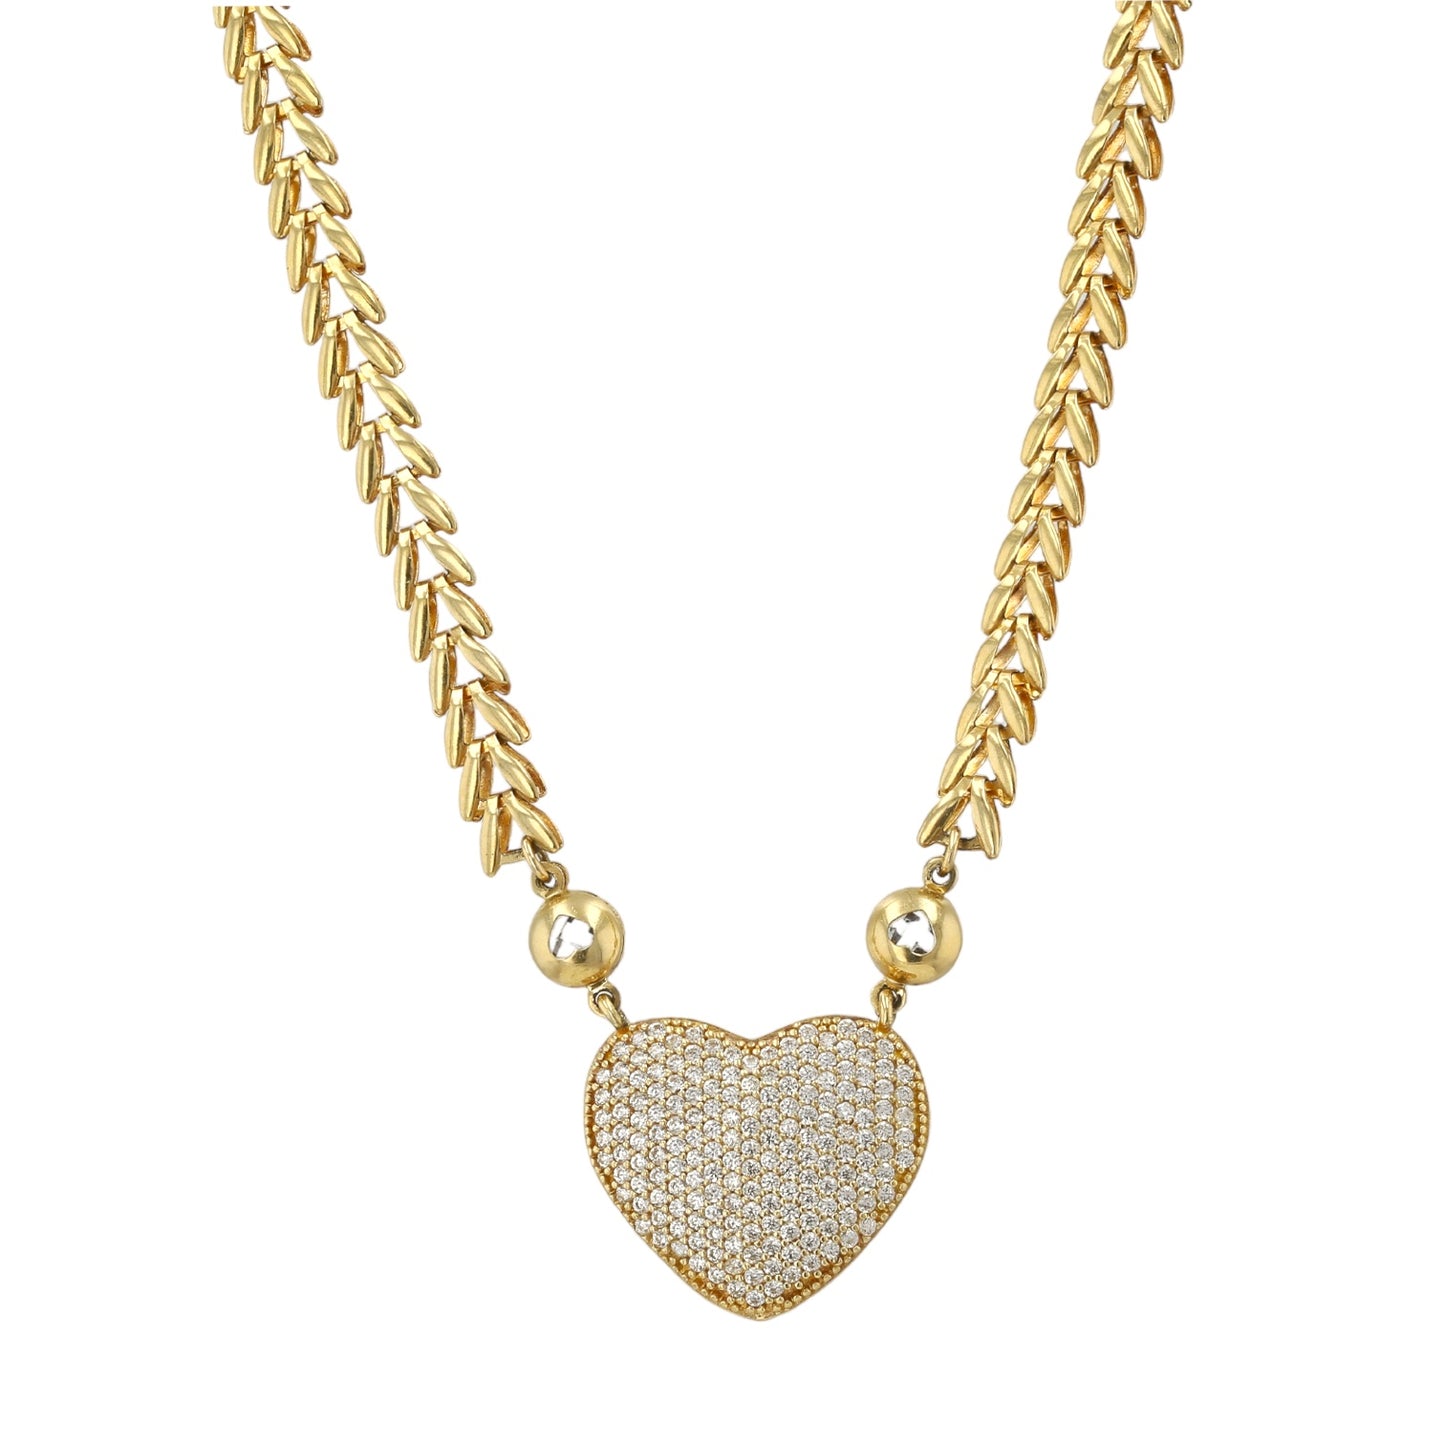 10K Yellow Gold Heart Necklace with CZ